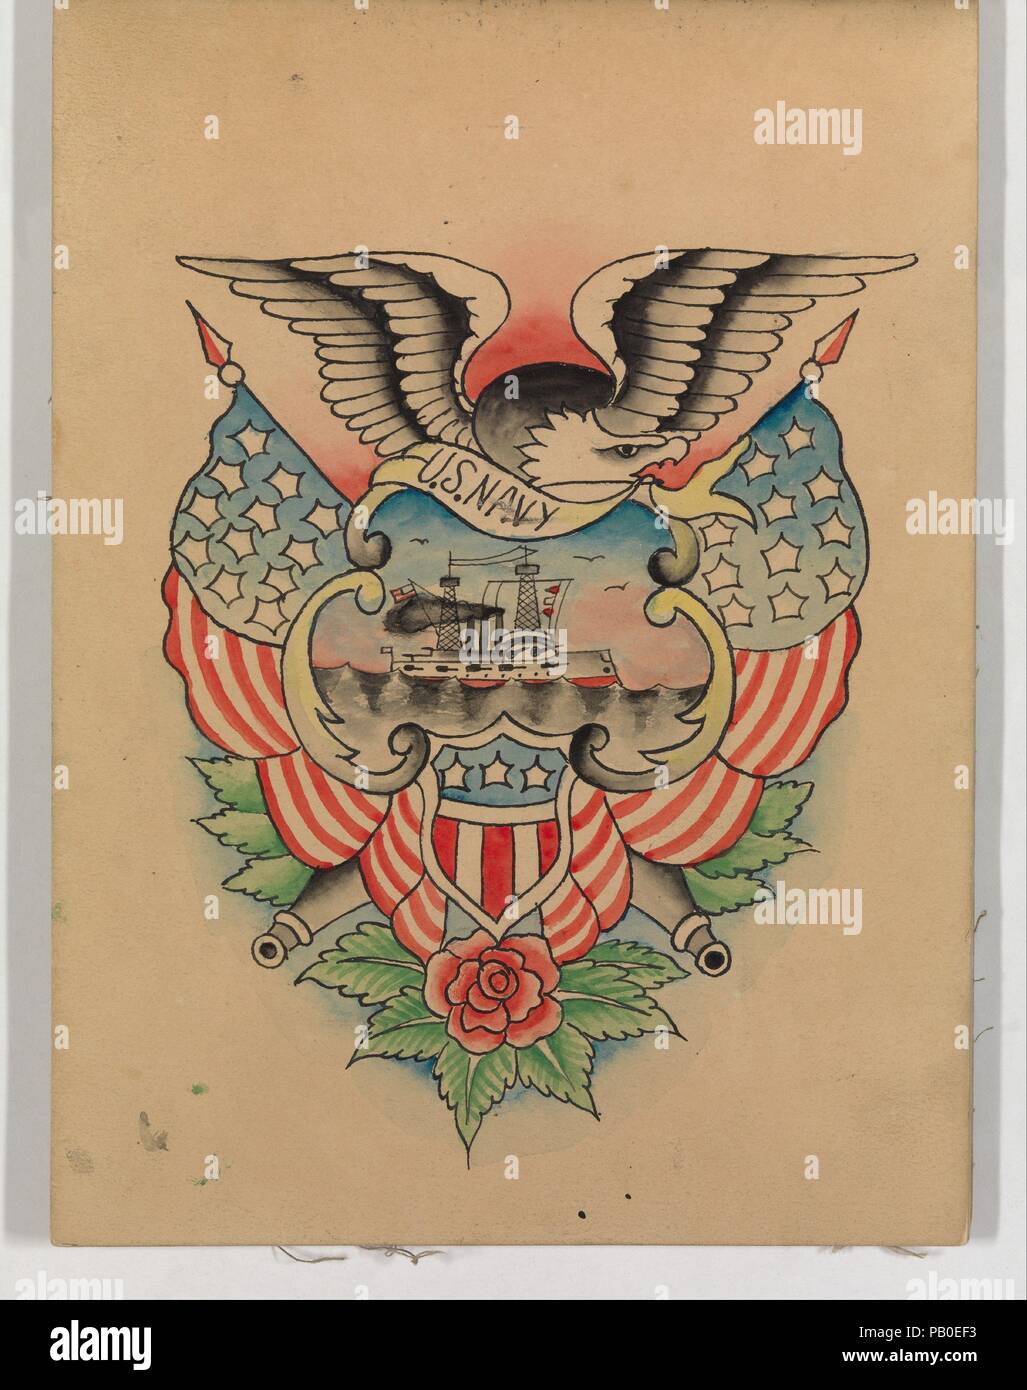 Tattoo Design with a Naval Theme. Artist: Clark & Sellers (American, active 20th century). Dimensions: Sheet: 8 1/4 × 6 1/16 in. (20.9 × 15.4 cm). Date: ca. 1900-1945. Museum: Metropolitan Museum of Art, New York, USA. Stock Photo